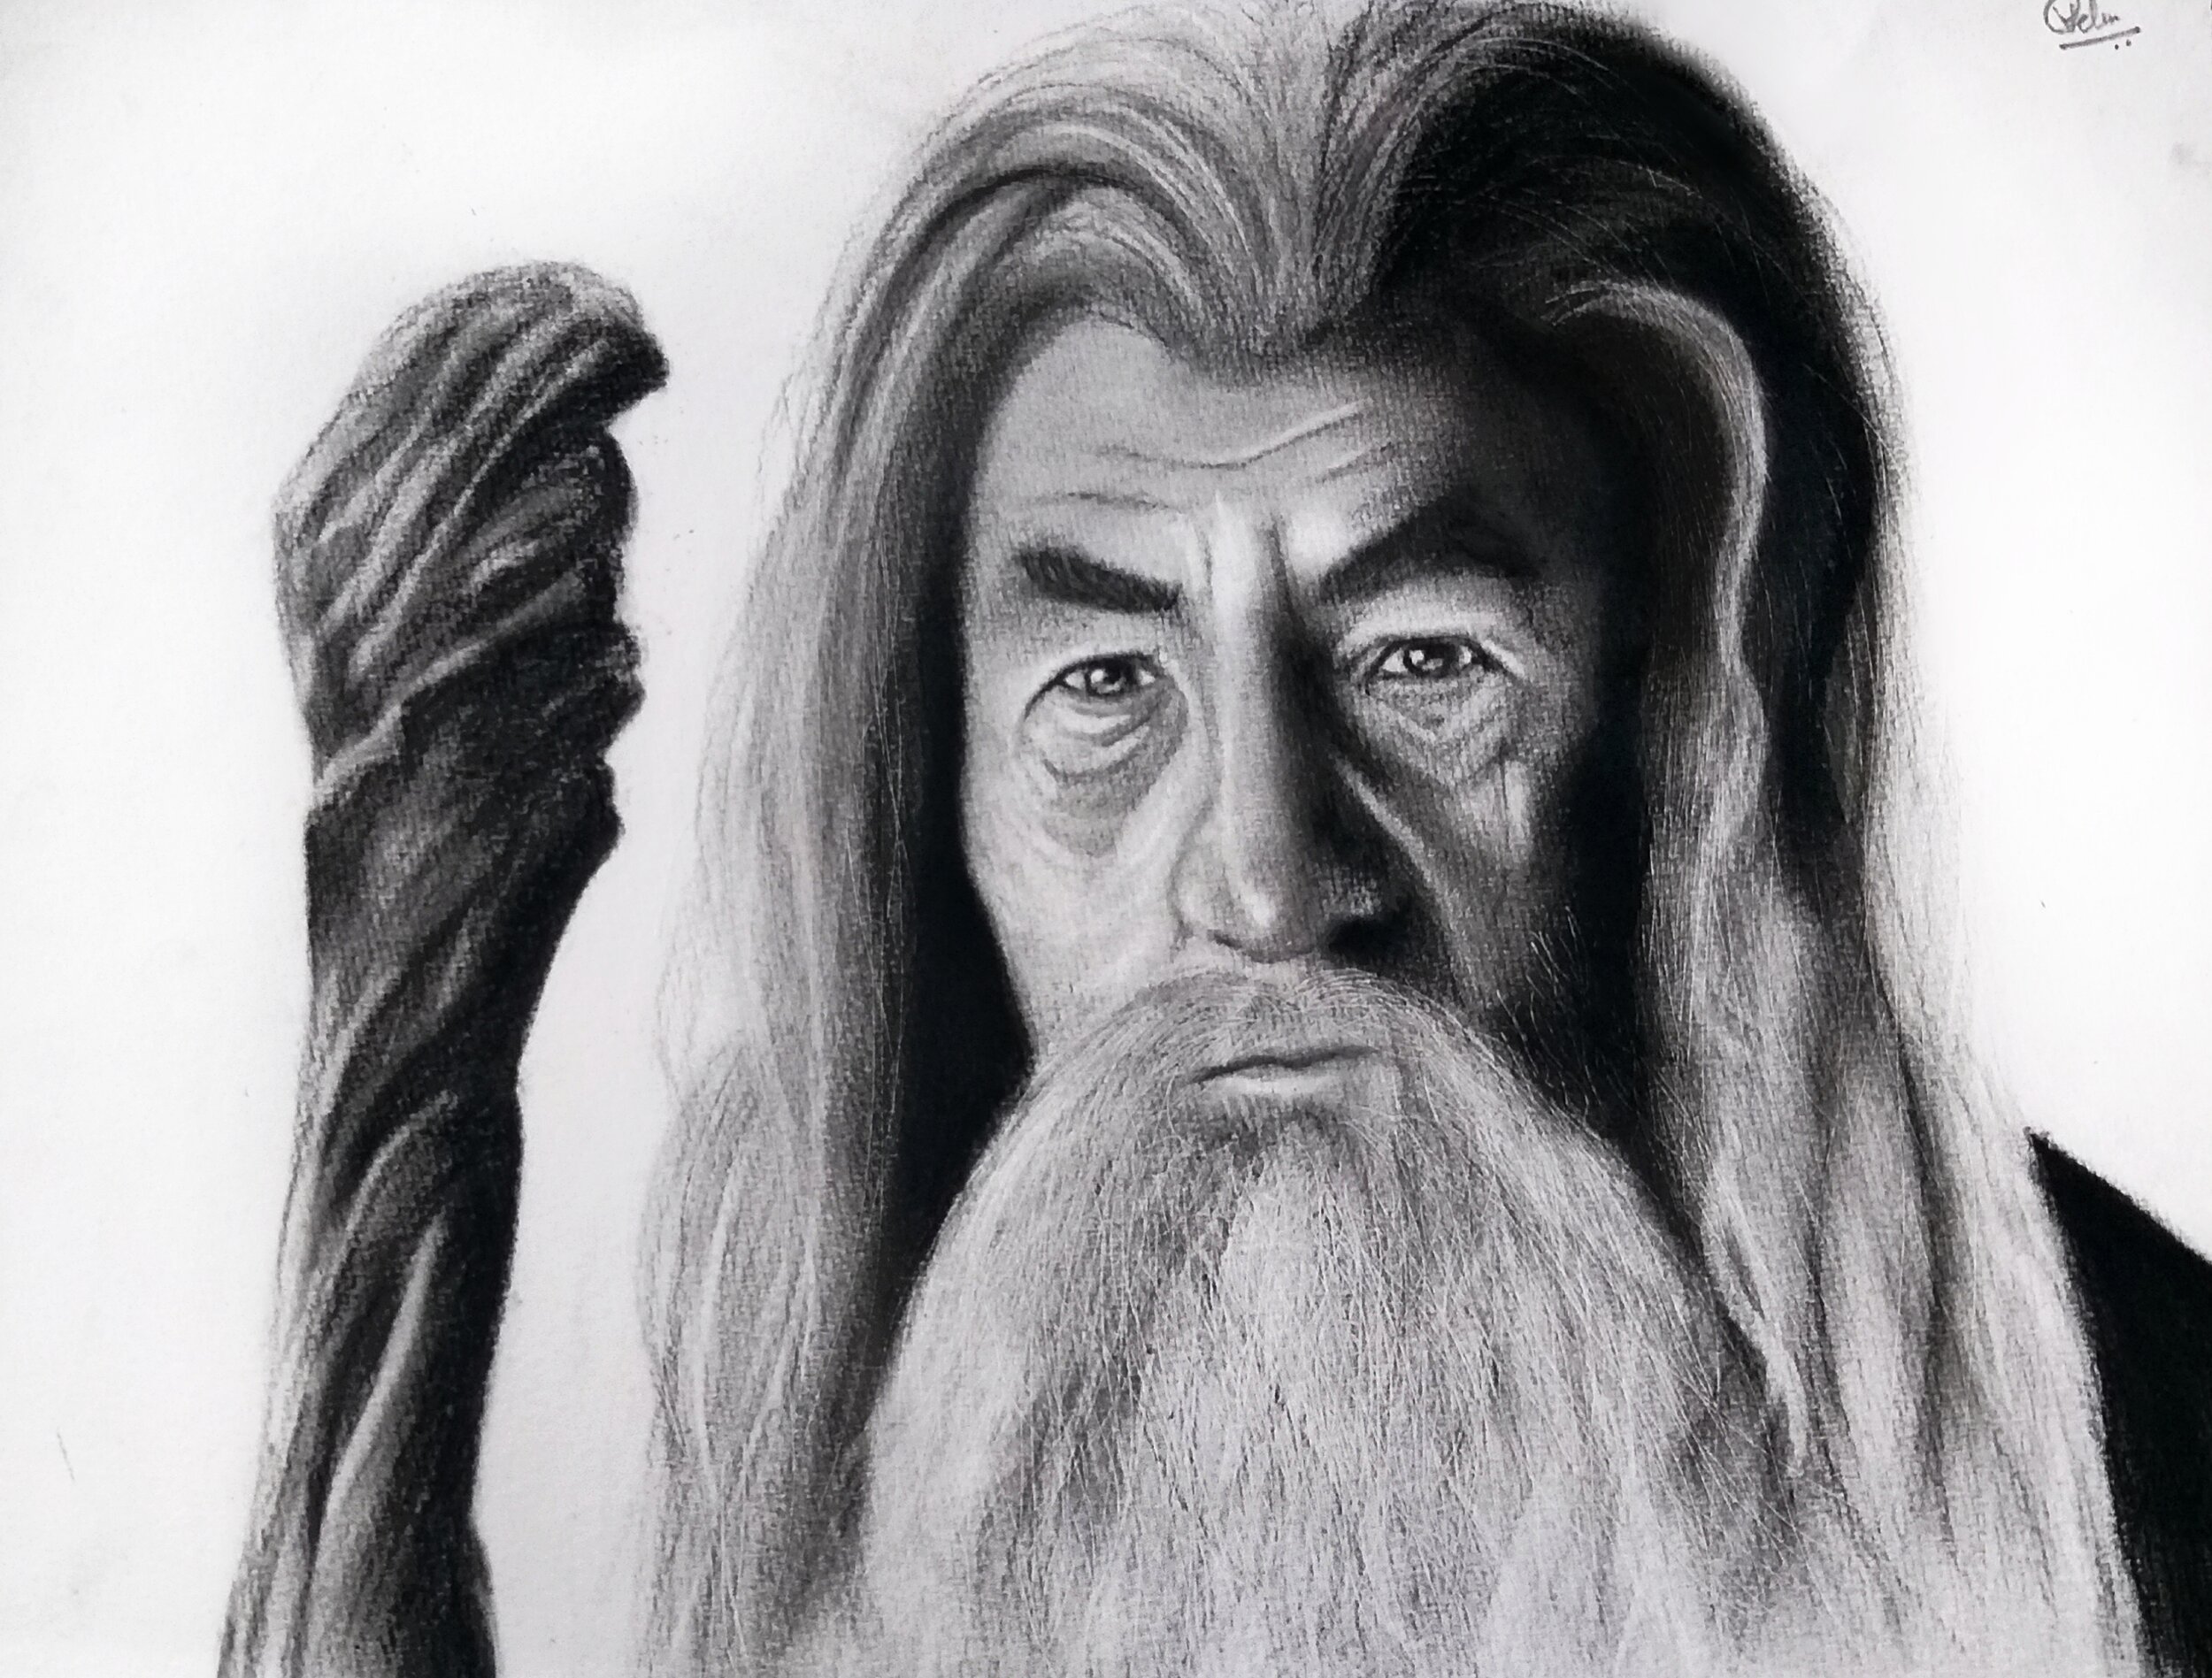 ‘And pass, you shall’- Gandalf in Grey